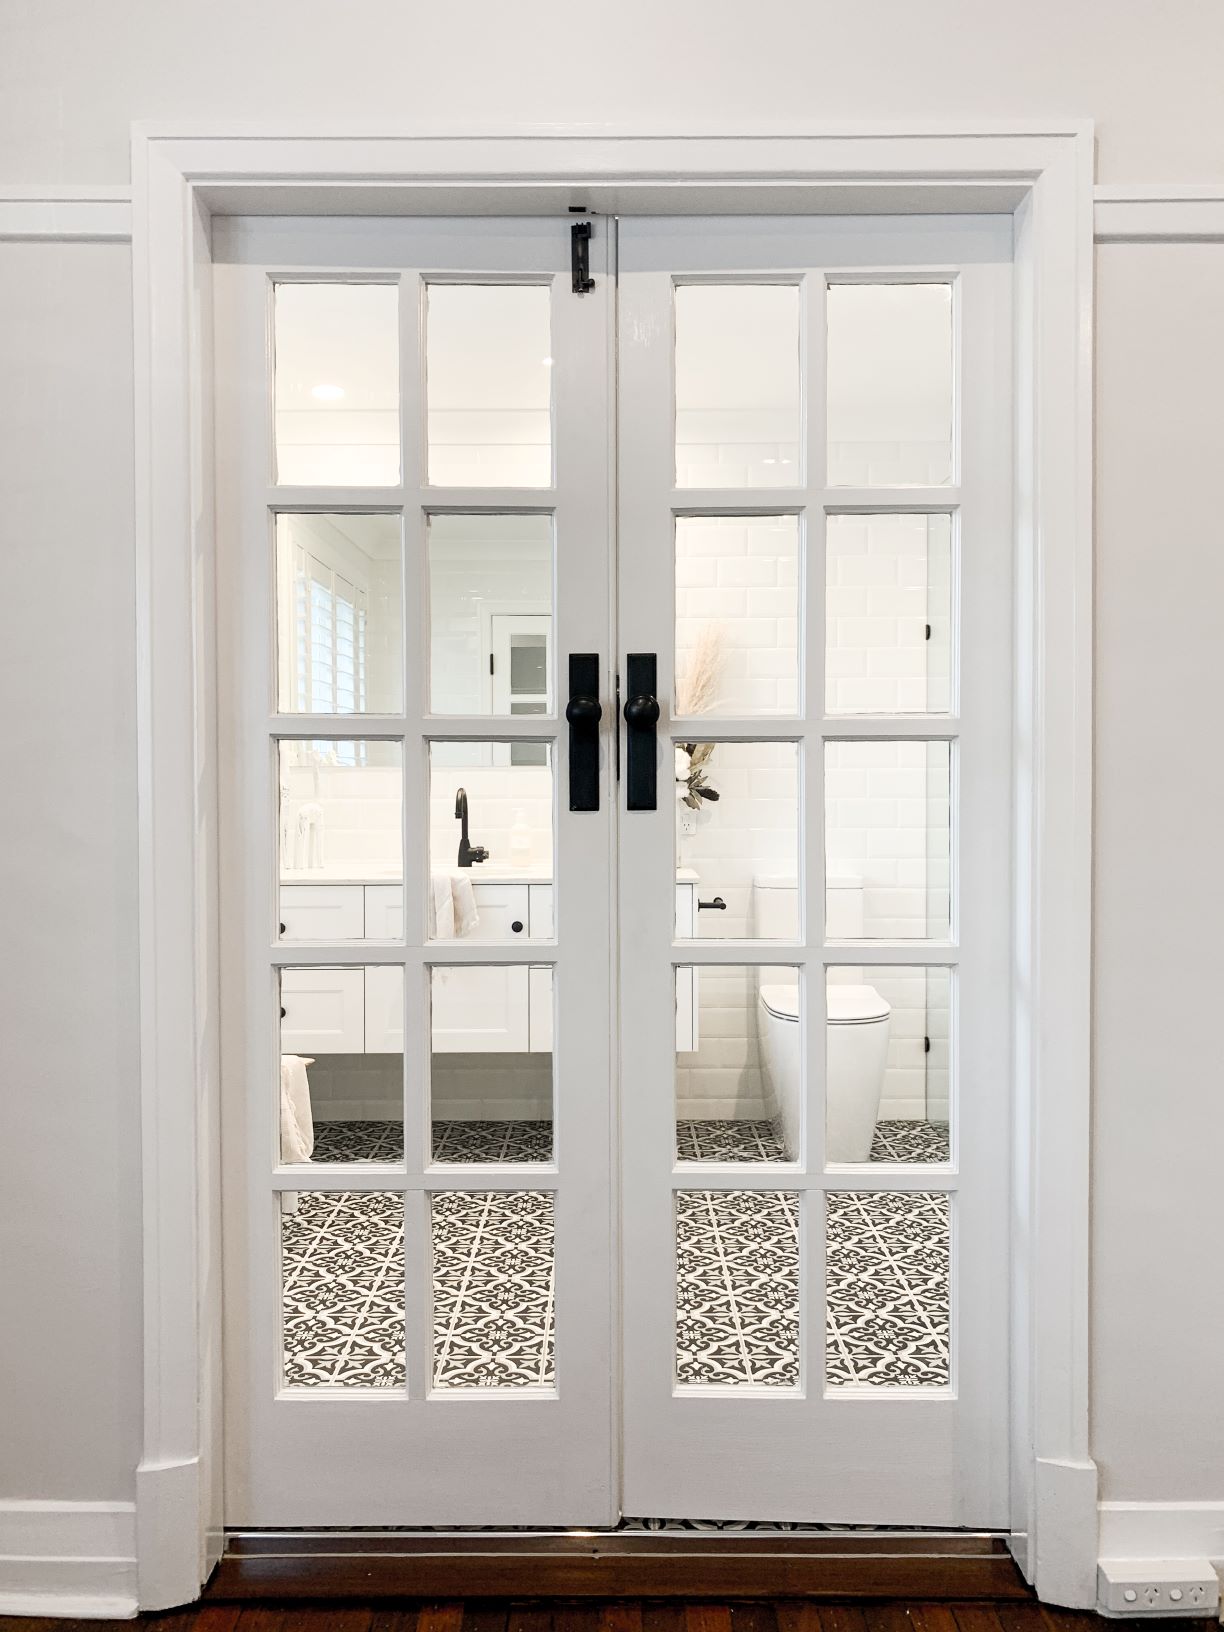 ascot ensuite french doors black and white floor tiles